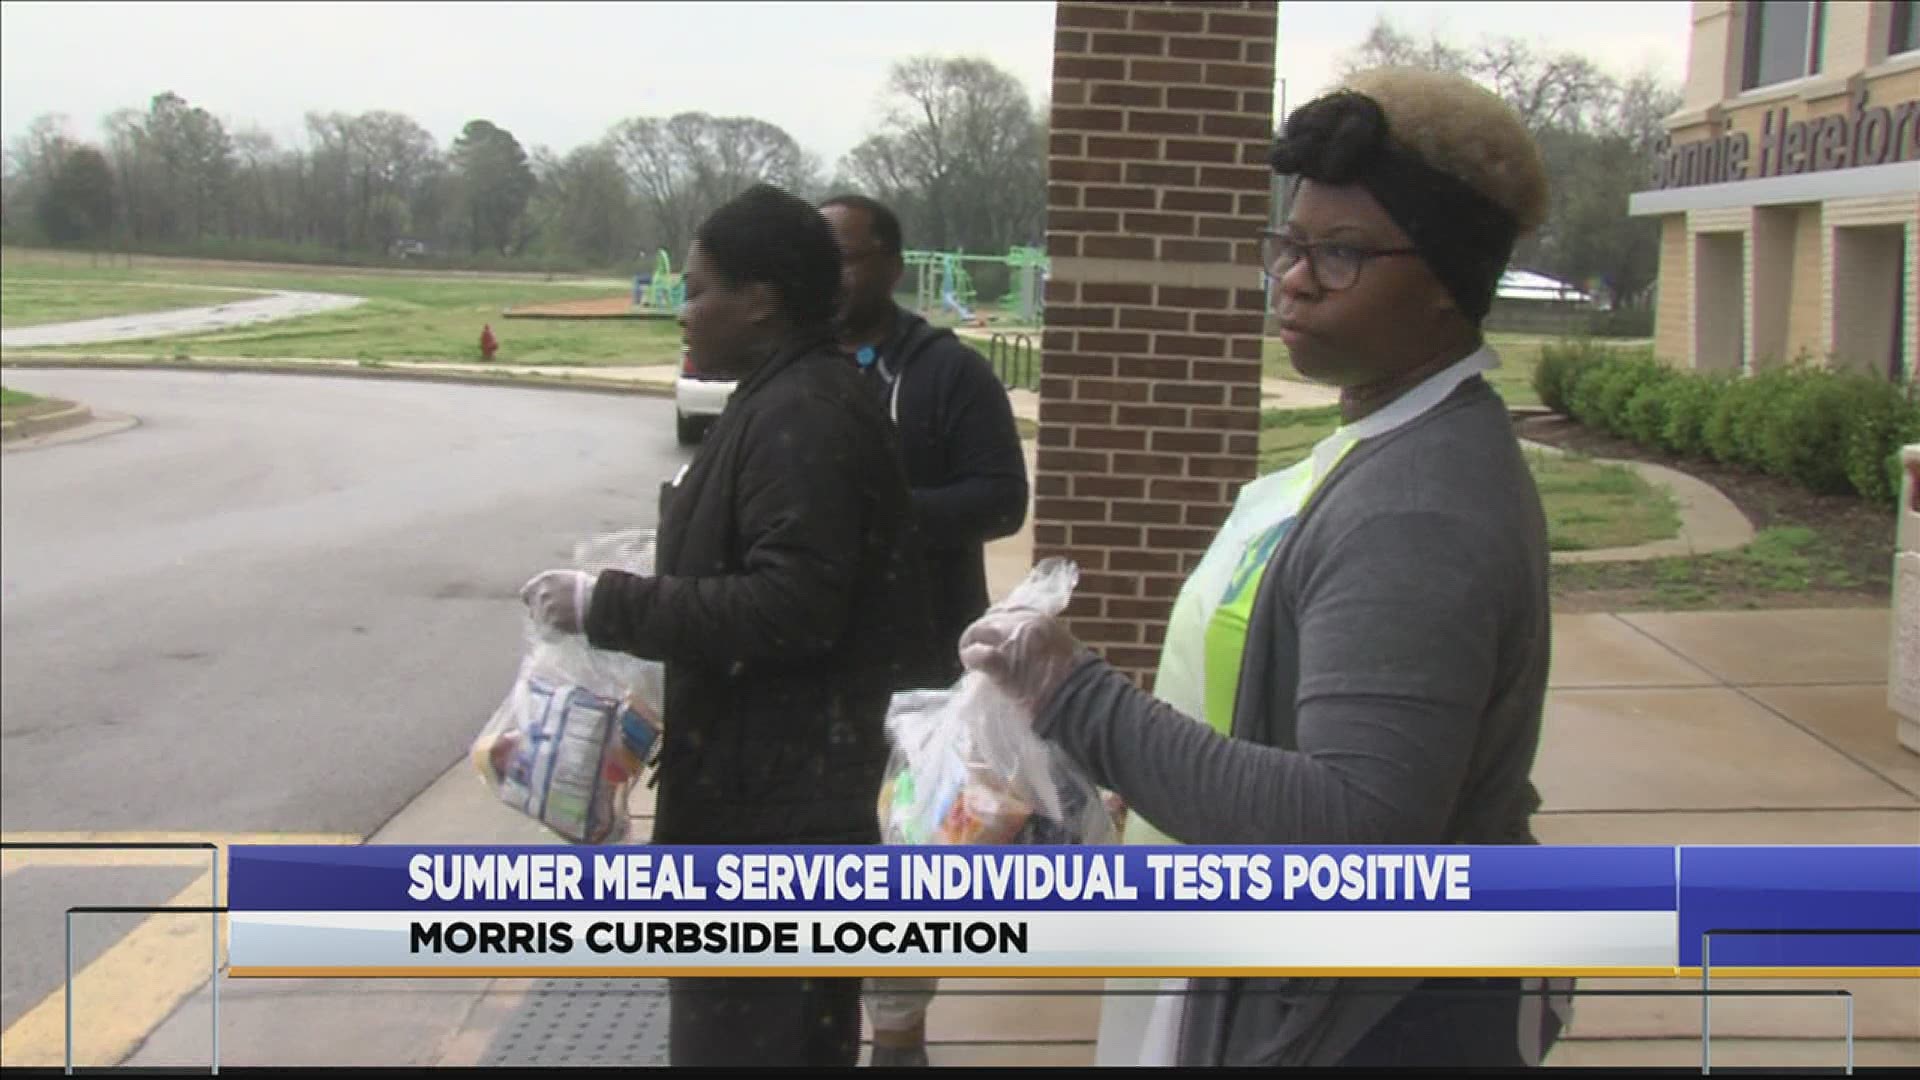 Officials say that anyone who visited the Morris Curbside Meal Service location last week may have come into contact with that person.